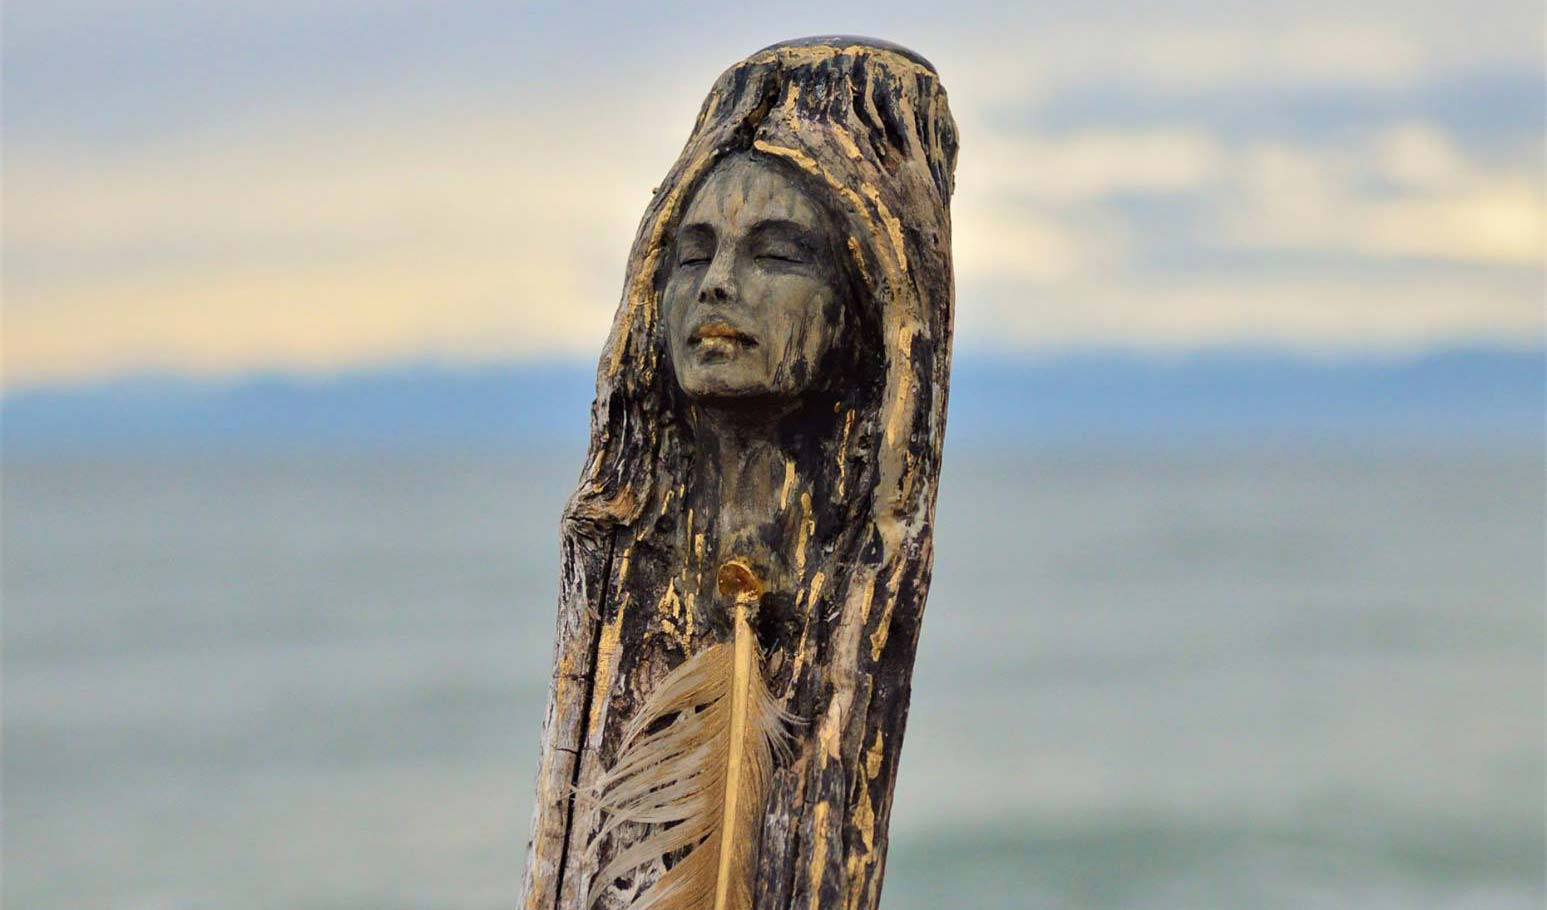 Magnificent Driftwood Sculptures Made from Discarded Wood